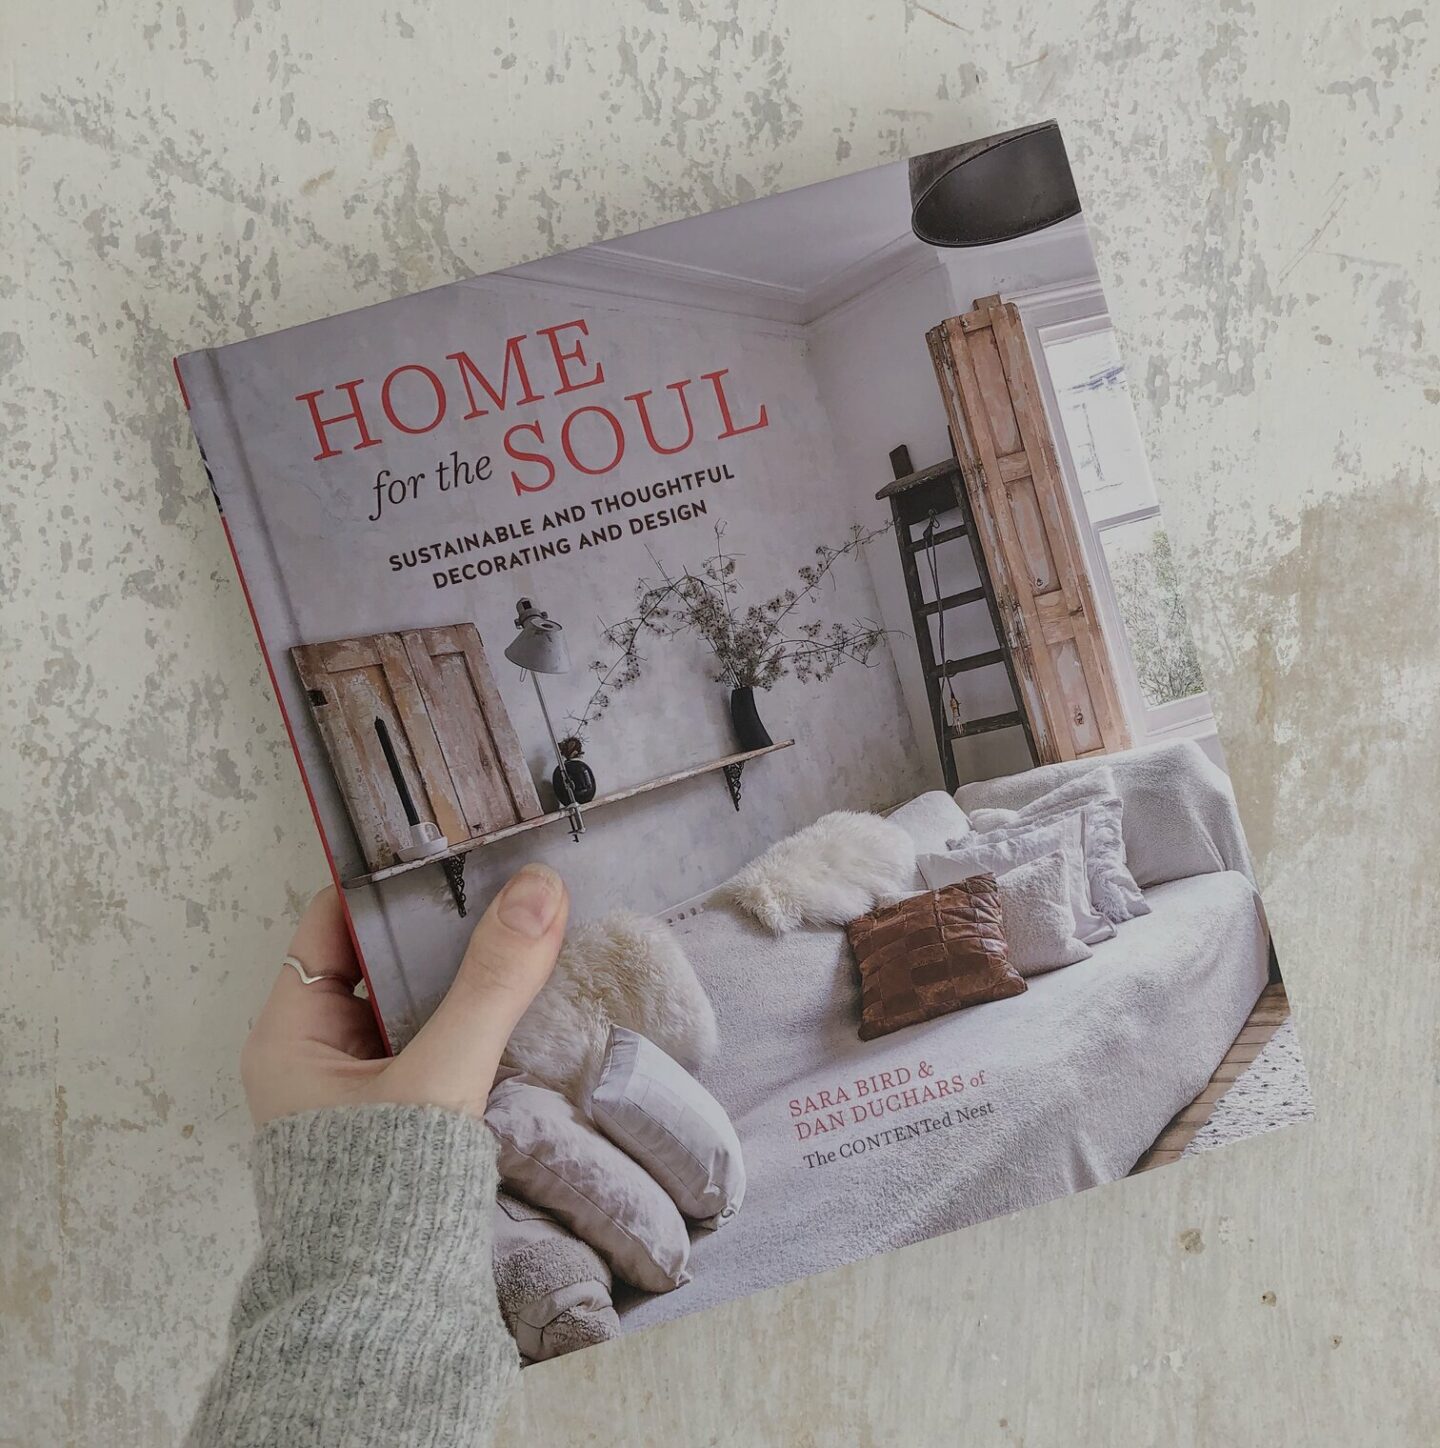 Home for the Soul book